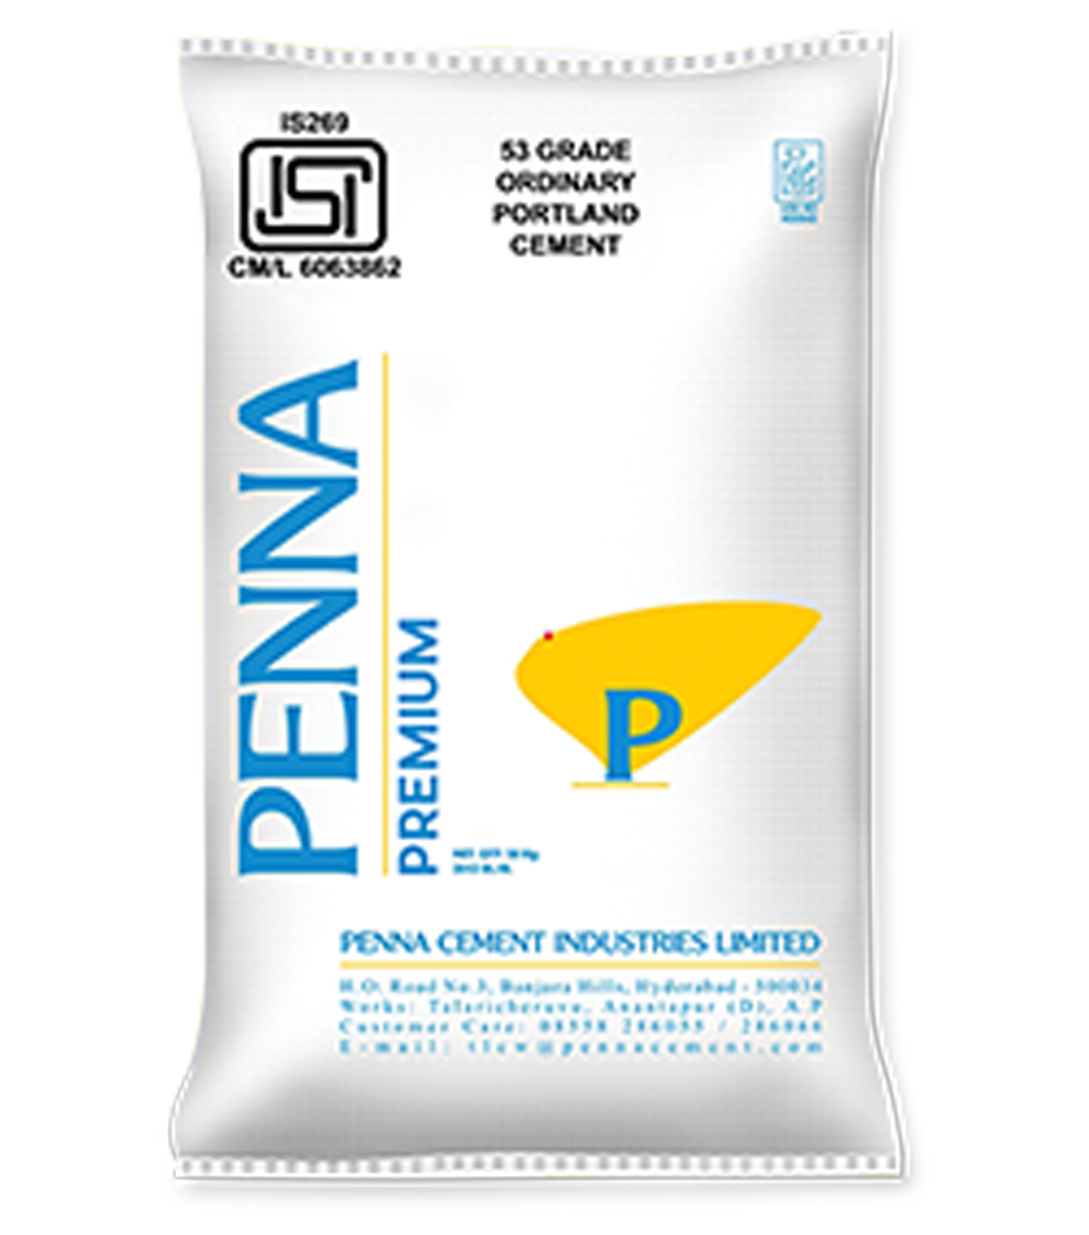 Penna Cement | Products - Ordinary Portland Cement | Slag Cement